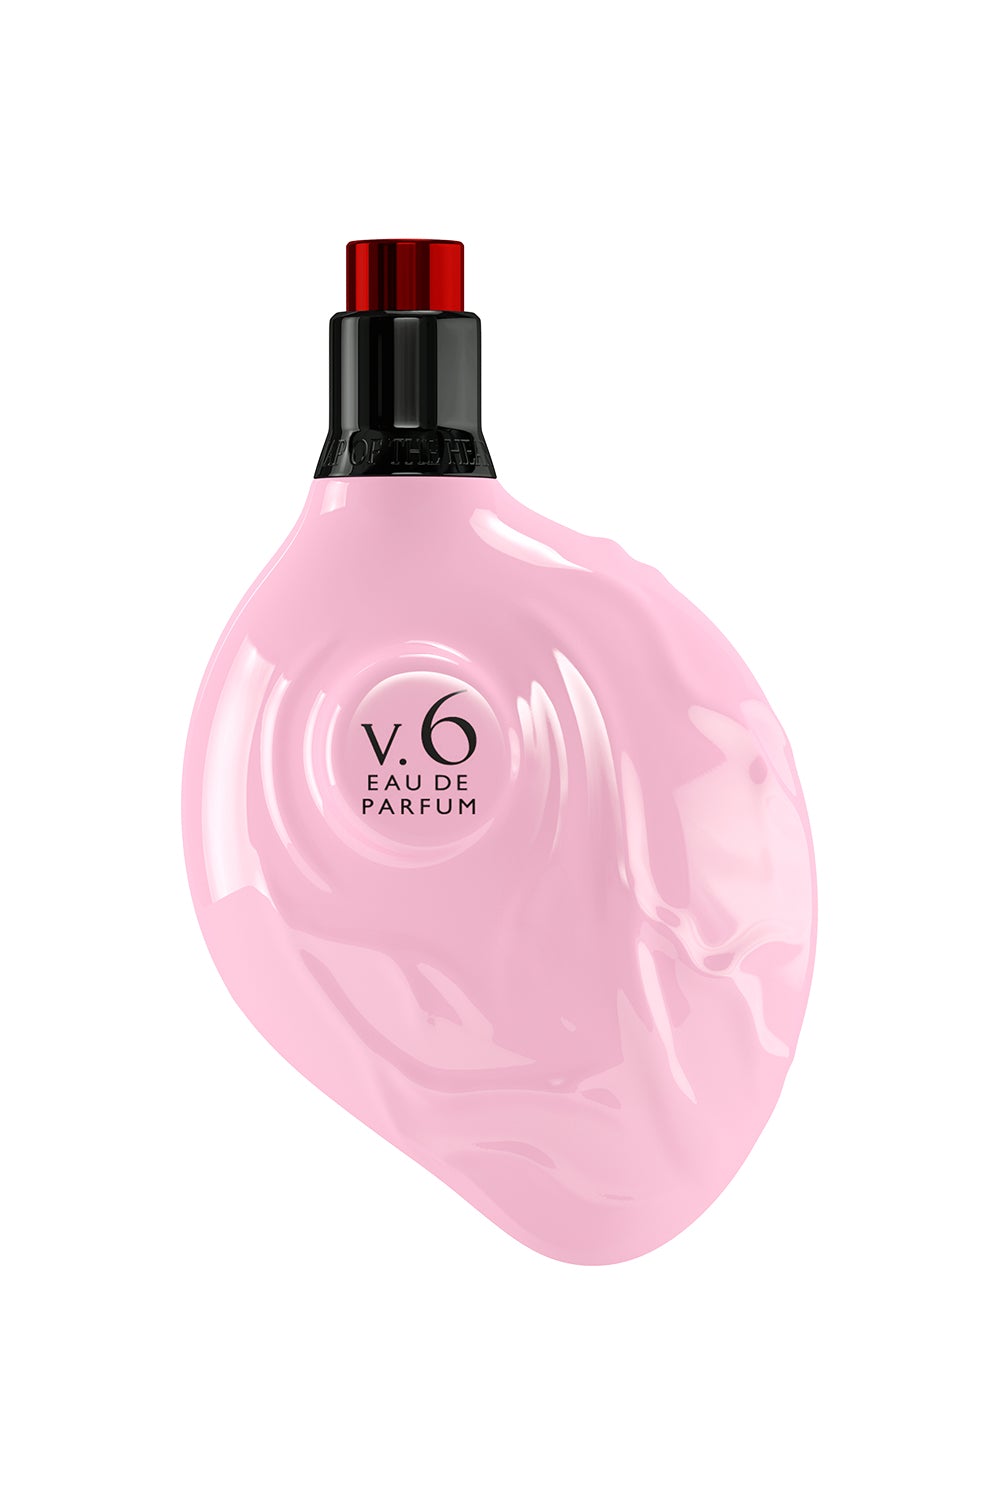 MAP OF THE HEART LIFESTYLE PINK PINK HEART V.6 90ML